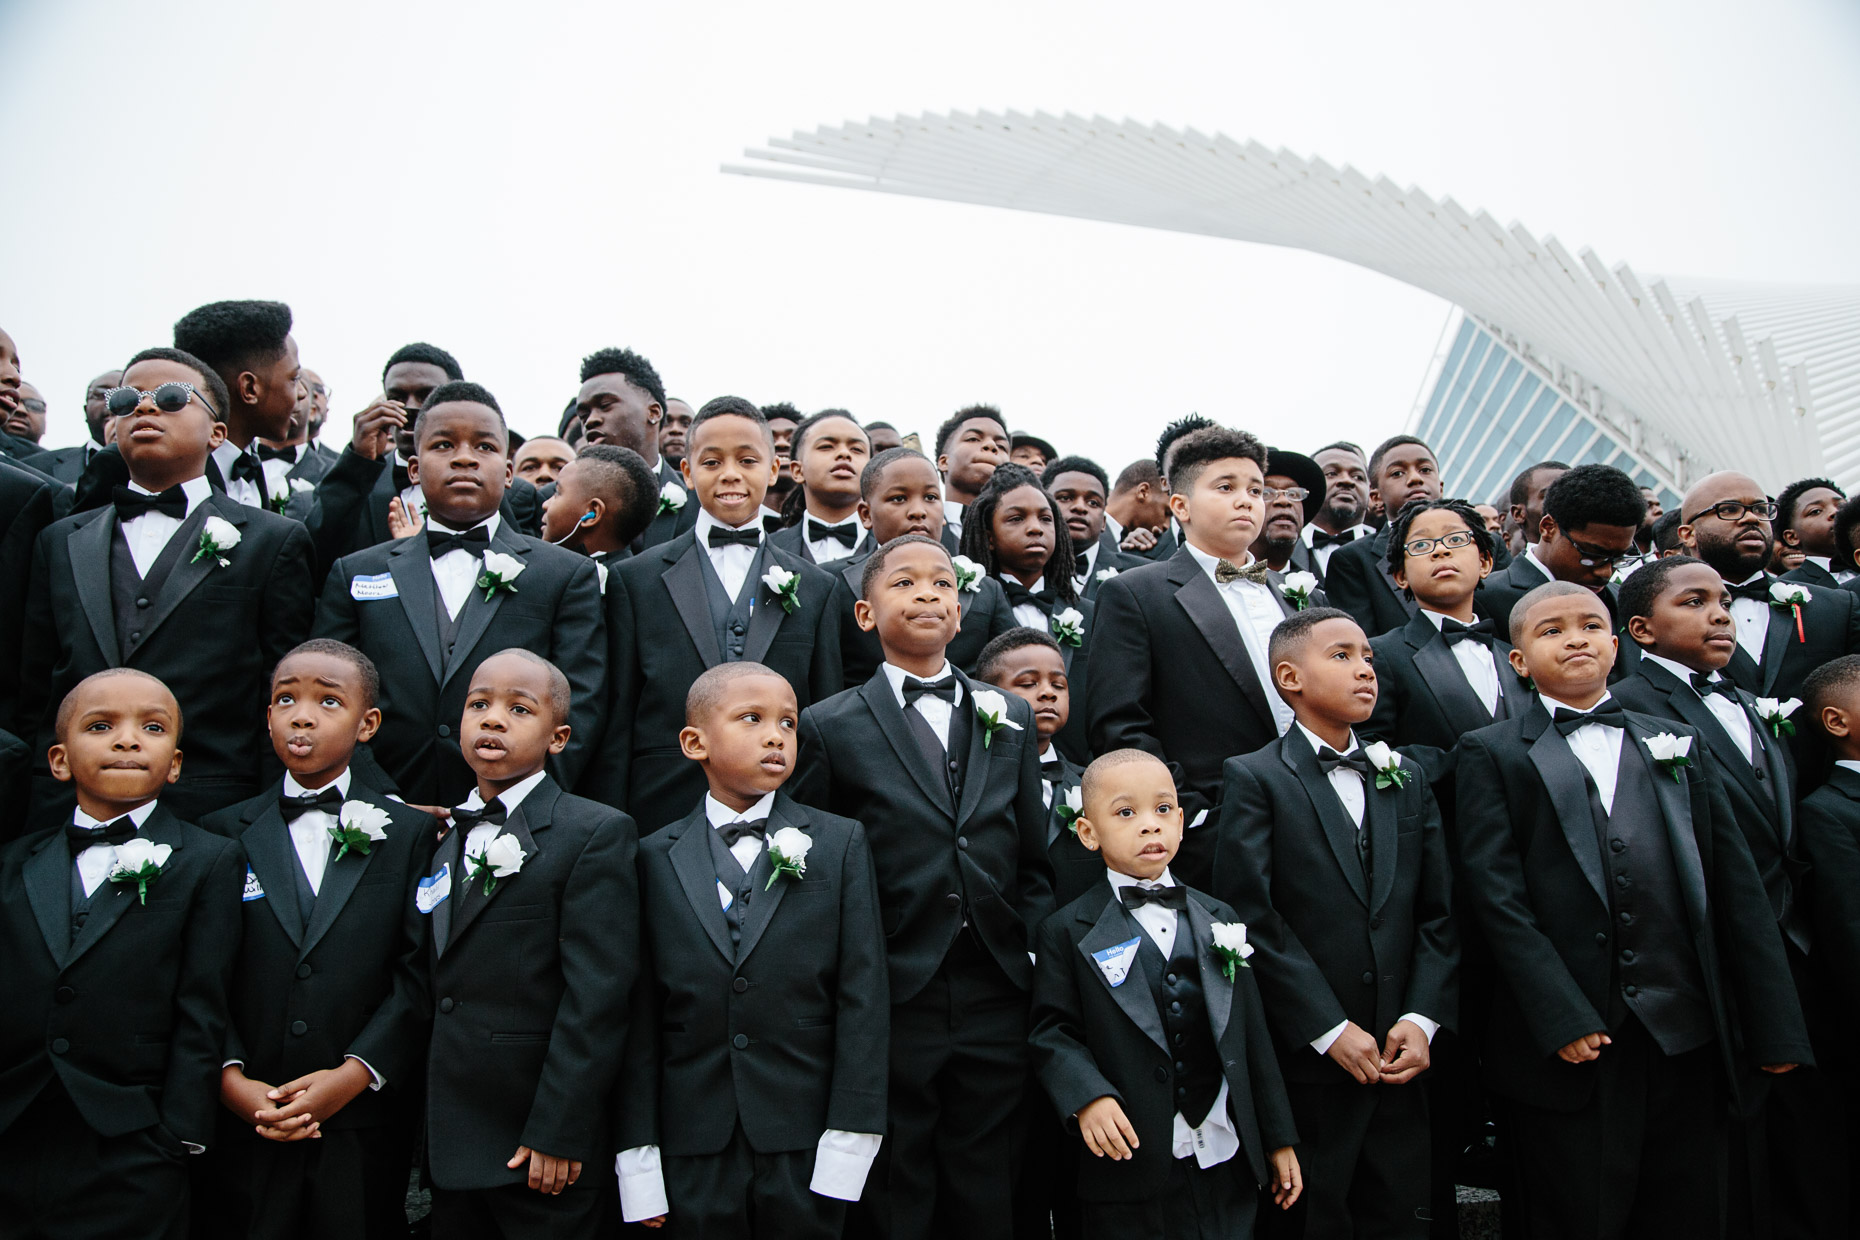 Participants of the 500 Black Tuxedos Event, organized by Andre Lee Ellis, gather for a group photo on the steps of the Milwaukee Art Museum on Saturday December 12th, 2015 in Milwaukee, Wisconsin.